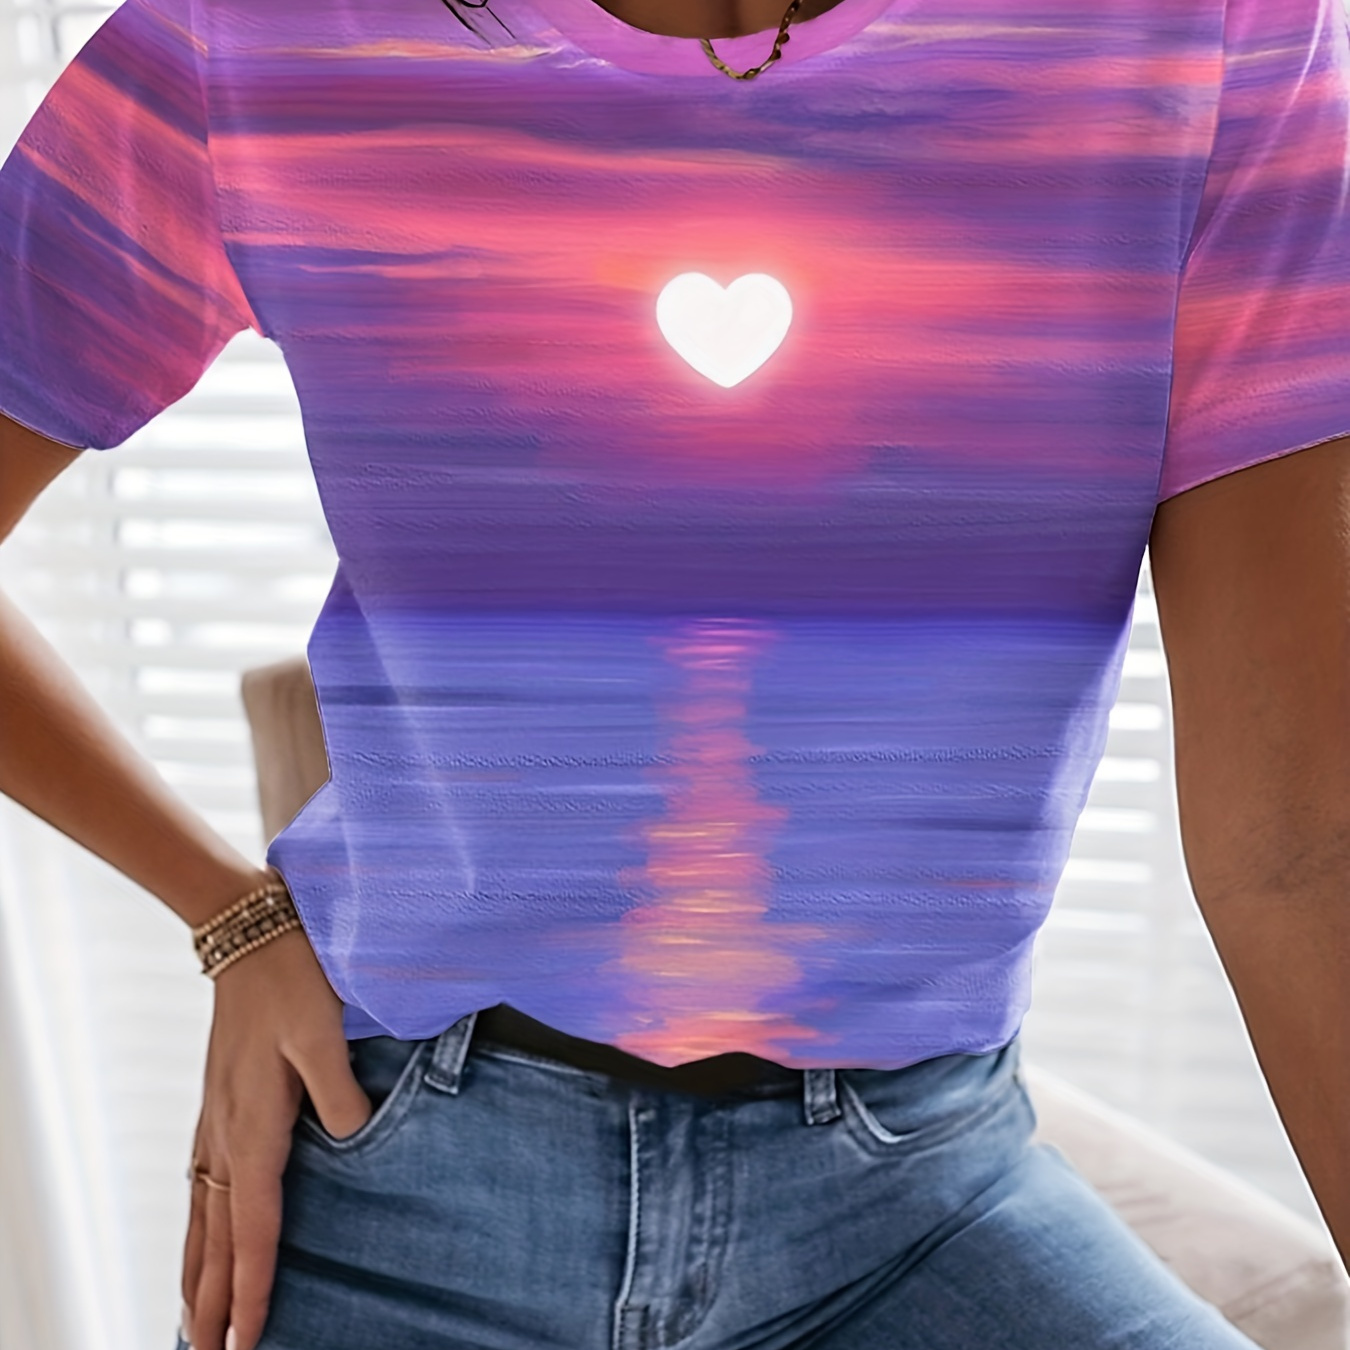 

Sunset Print T-shirt, Short Sleeve Crew Neck Casual Top For Summer & Spring, Women's Clothing